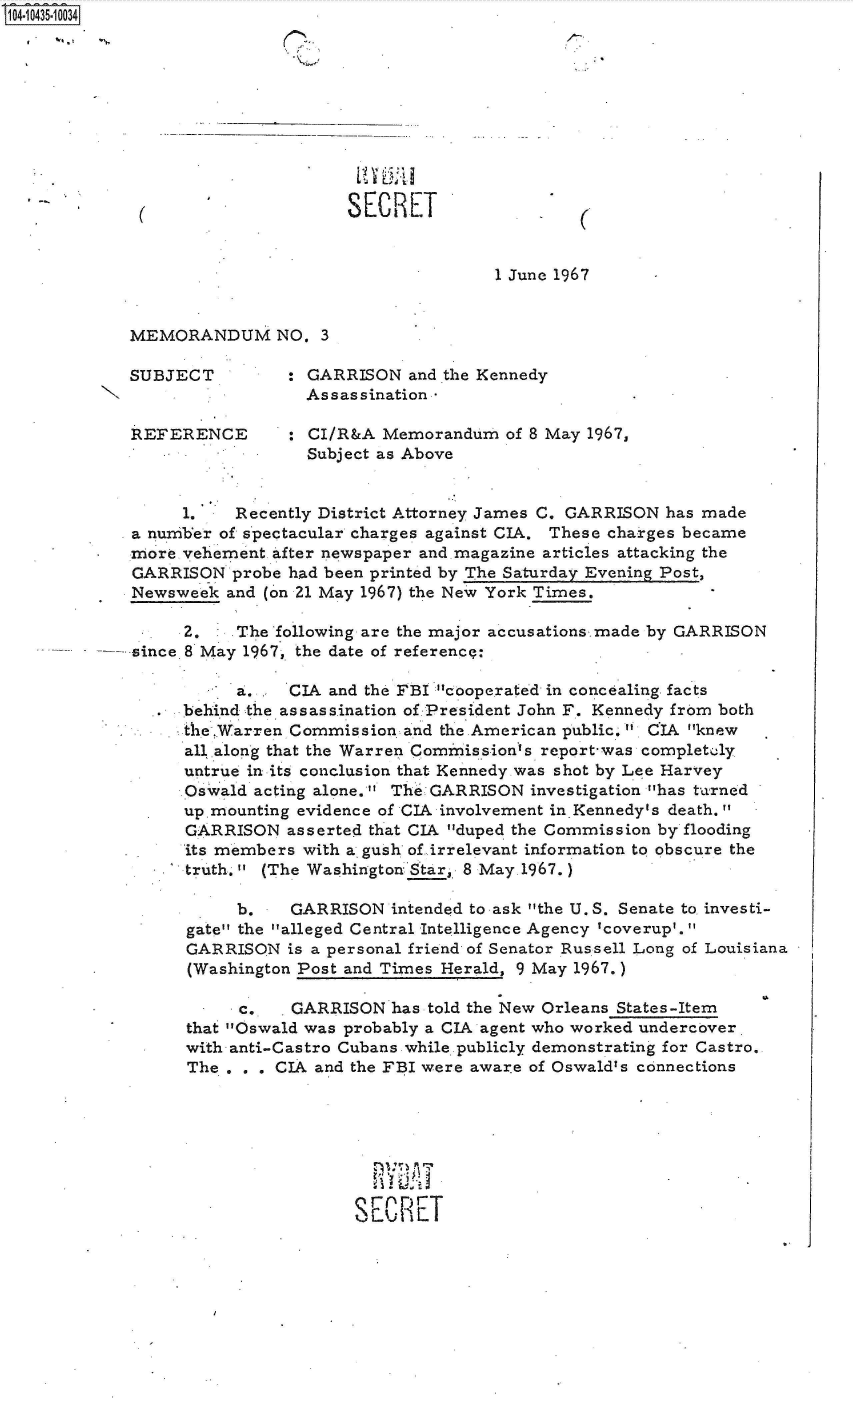 handle is hein.jfk/jfkarch48671 and id is 1 raw text is: 14 i435 10034










                                  SECRET


                                                 1 June 1967


            MEMORANDUM NO. 3

            SUBJECT         : GARRISON  and the Kennedy
                              Assassination

            REFERENCE       : CI/R&A  Memorandum  of 8 May 1967,
                              Subject as Above


                 1.    Recently District Attorney James C. GARRISON has made
            a number of spectacular charges against CIA. These charges became
            more vehement after newspaper and.magazine articles attacking the
            GARRISON  probe had been printed by The Saturday Evening Post,
            Newsweek  and (on 21 May 1967) the New York Times.

                 2.    The following are the major accusations made by GARRISON
            since 8 May 1967, the date of referencq:

                       a.   CIA and the FBI cooperated in concealing facts
                 behind the assassination of President John F. Kennedy from both
                 the Warren Commission  and the American public.  CIA knew
                 all along that the Warren Commission's report-was completely
                 untrue in its conclusion that Kennedy was shot by Lee Harvey
                 Oswald  acting alone. The GARRISON investigation has t-arned
                 up.mounting evidence of CIA involvement in.Kennedy's death.
                 GARRISON   asserted that CIA duped the Commission by flooding
                 'its members with a. gush of irrelevant information to obscure the
                 truth.  (The Washington Star, 8 May. 1967.)

                       b.   GARRISON   intended to ask the U.S. Senate to investi-
                  gate the alleged Central Intelligence Agency 'coverup'.
                  GARRISON  is a personal friend of Senator Russell Long of Louisiana
                  (Washington Post and Times Herald, 9 May 1967.)

                       c.   GARRISON   has told the New Orleans States-Item
                  that Oswald was probably a CIA agent who worked undercover
                  with anti-Castro Cubans while publicly demonstrating for Castro.
                  The . . . CIA and the FBI were aware of Oswald's connections







                                   SEC RET


